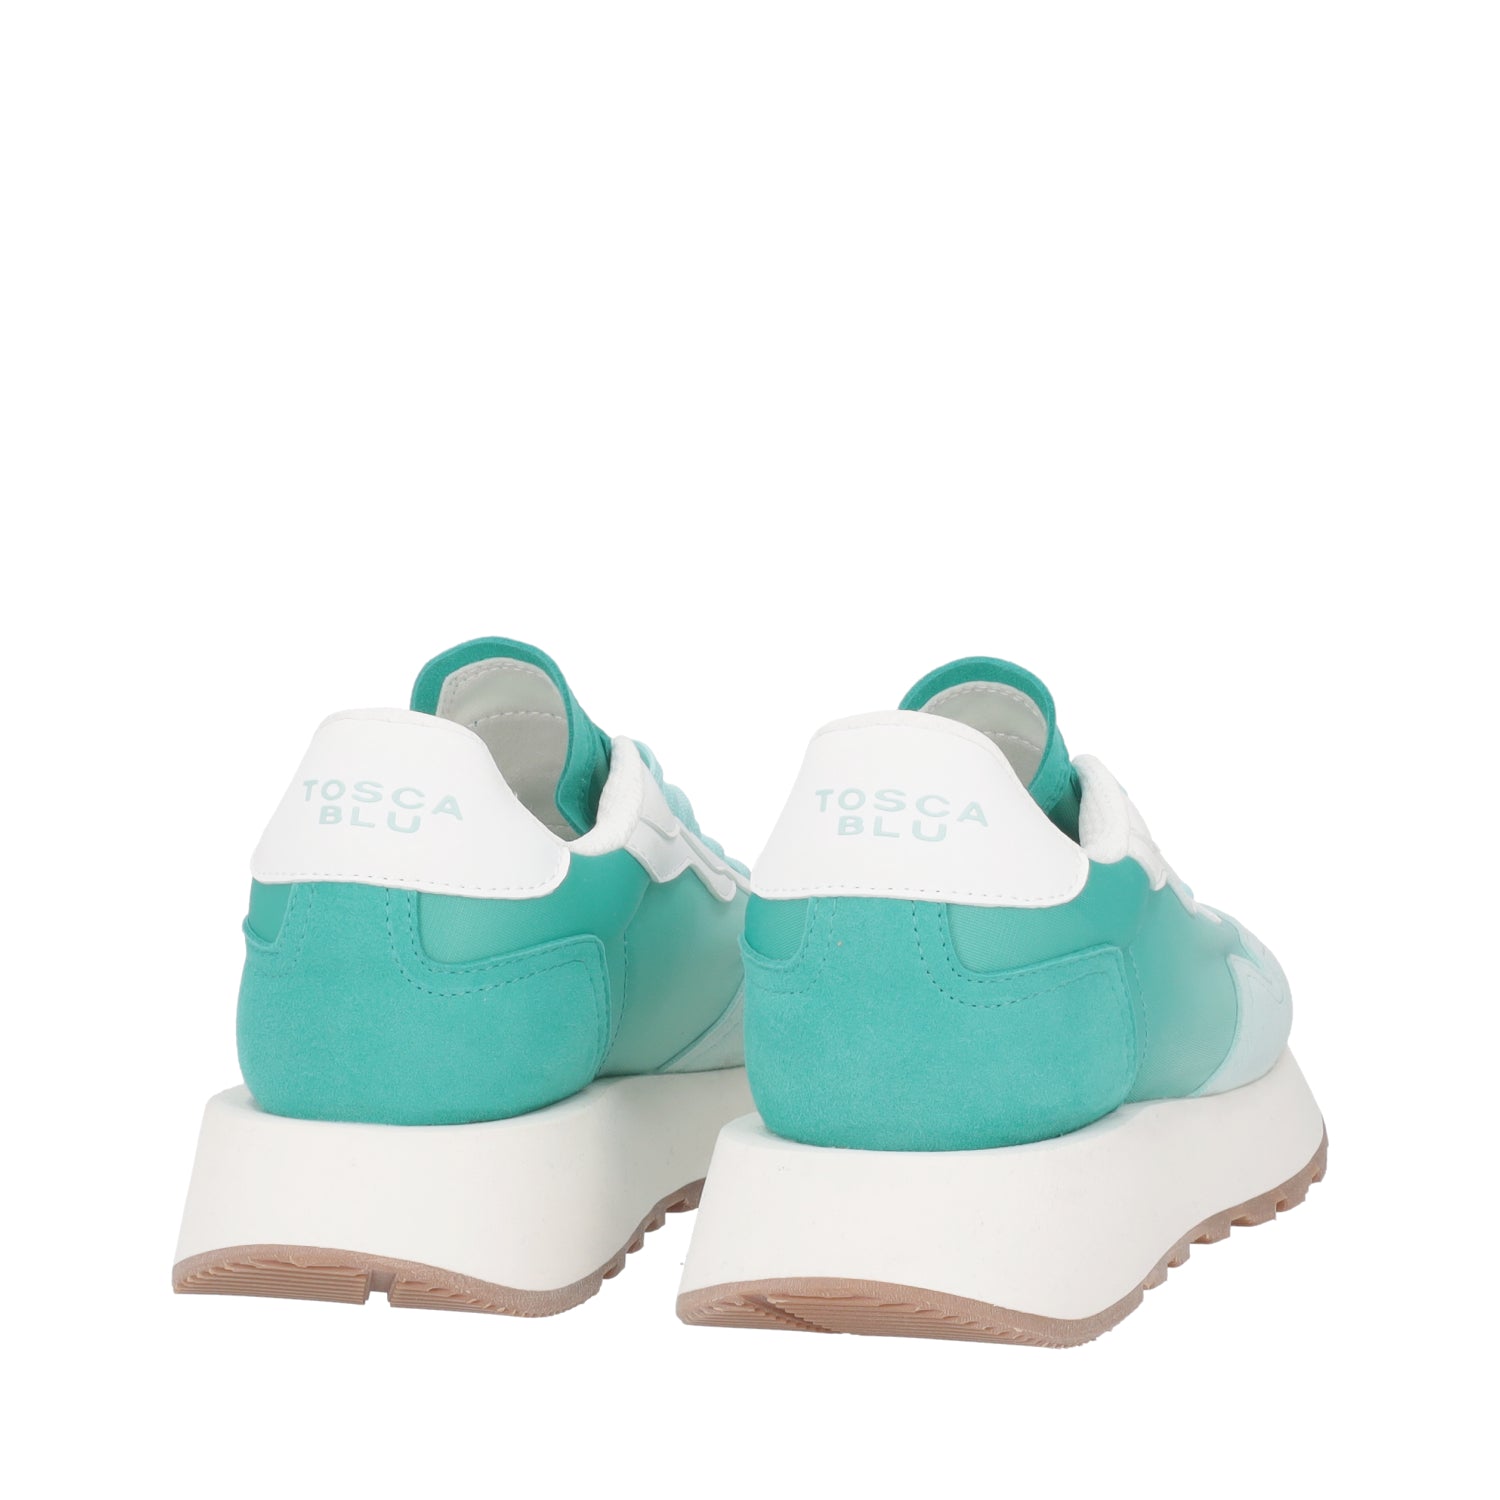 LIGHT BLUE ALBA SNEAKERS WITH SHADED EFFECT